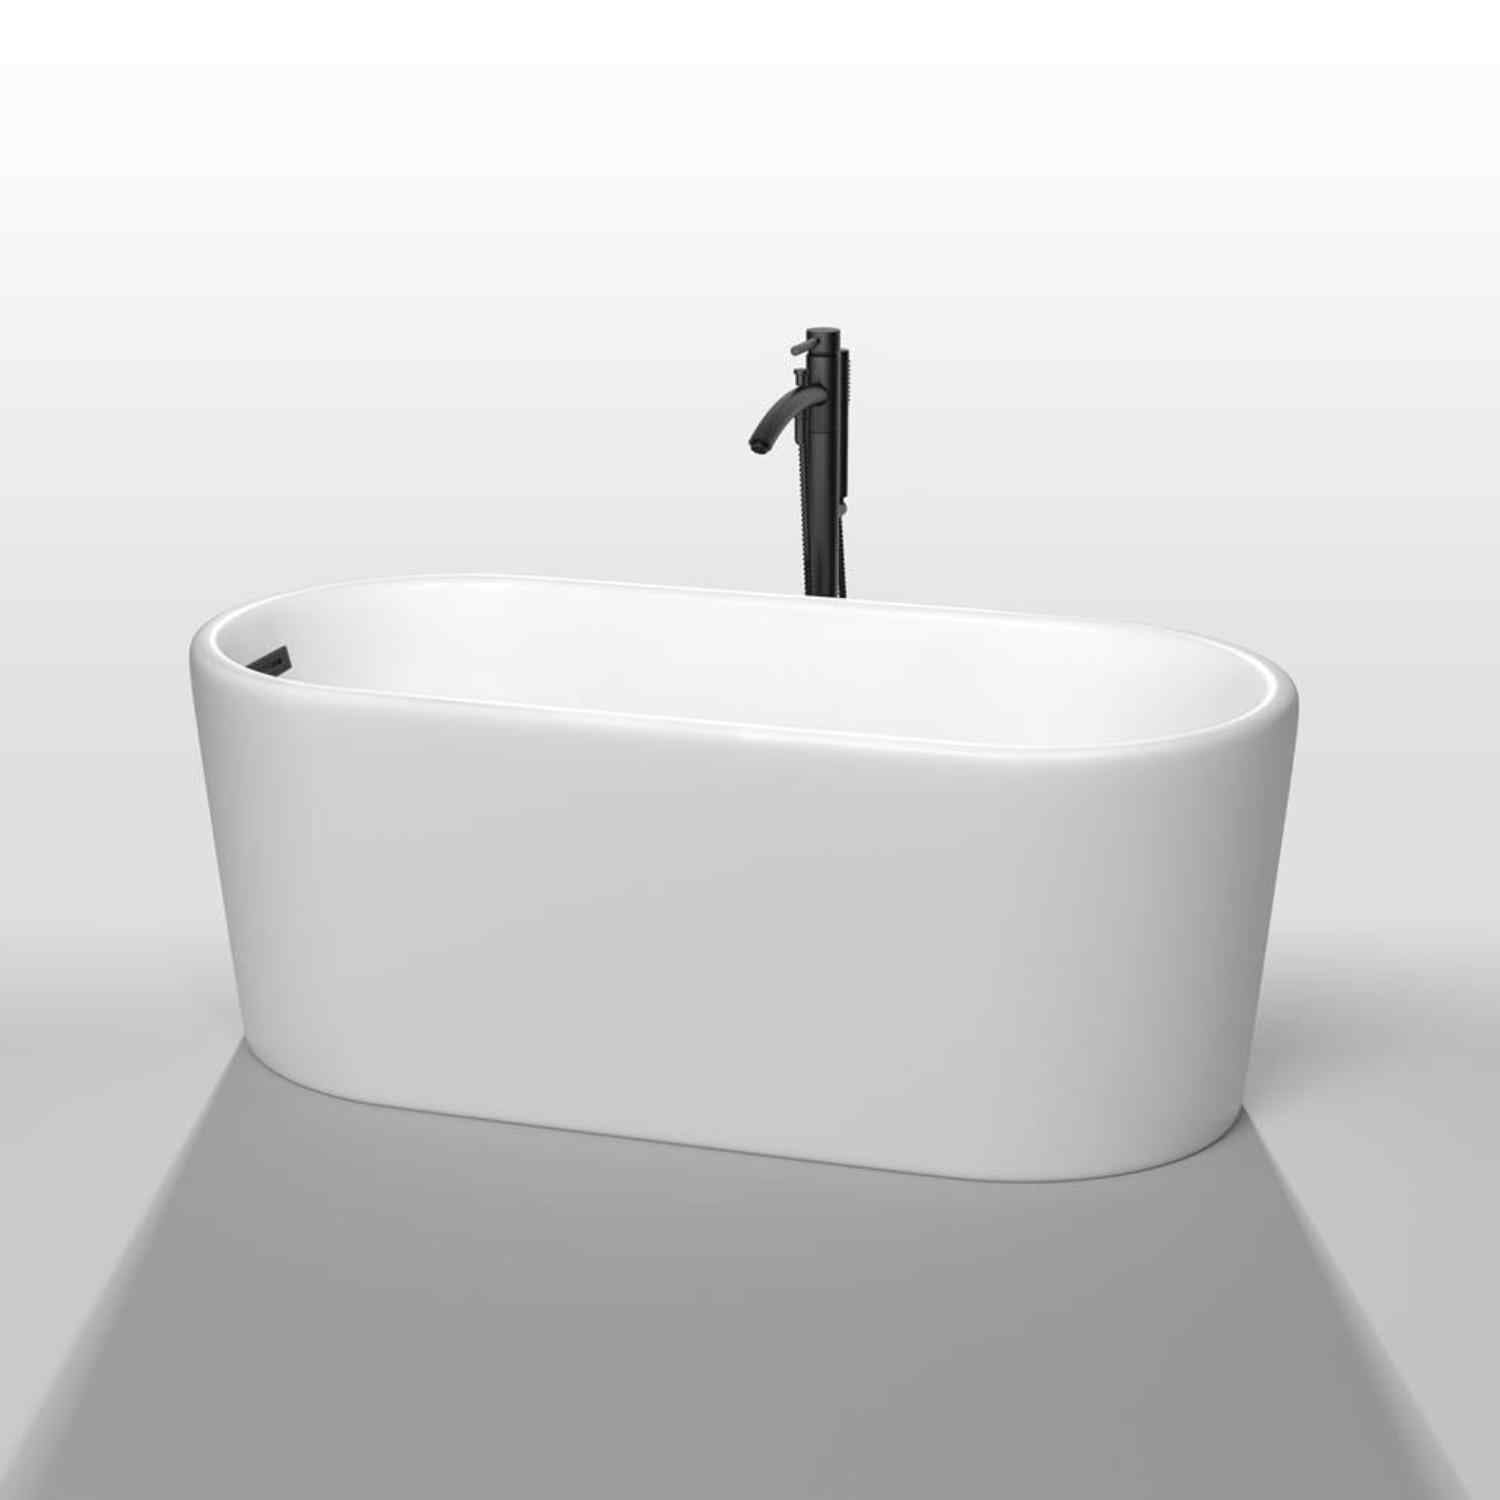 Wyndham collection Ursula 59 Inch Freestanding Bathtub in  Mate White closed view